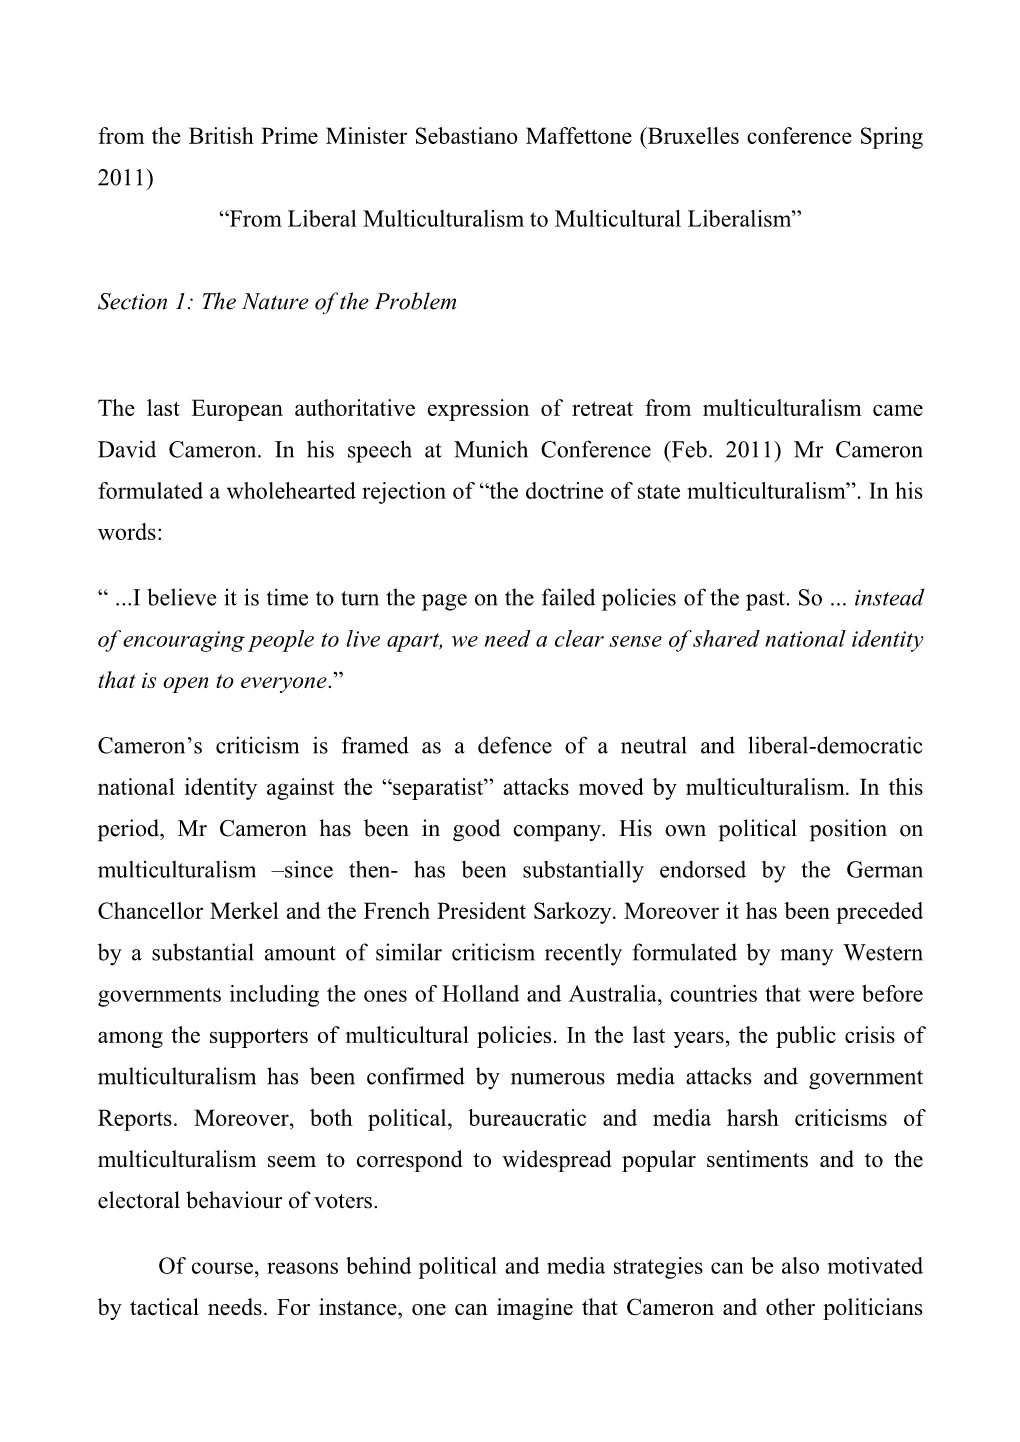 From the British Prime Minister Sebastiano Maffettone (Bruxelles Conference Spring 2011) “From Liberal Multiculturalism to Multicultural Liberalism”